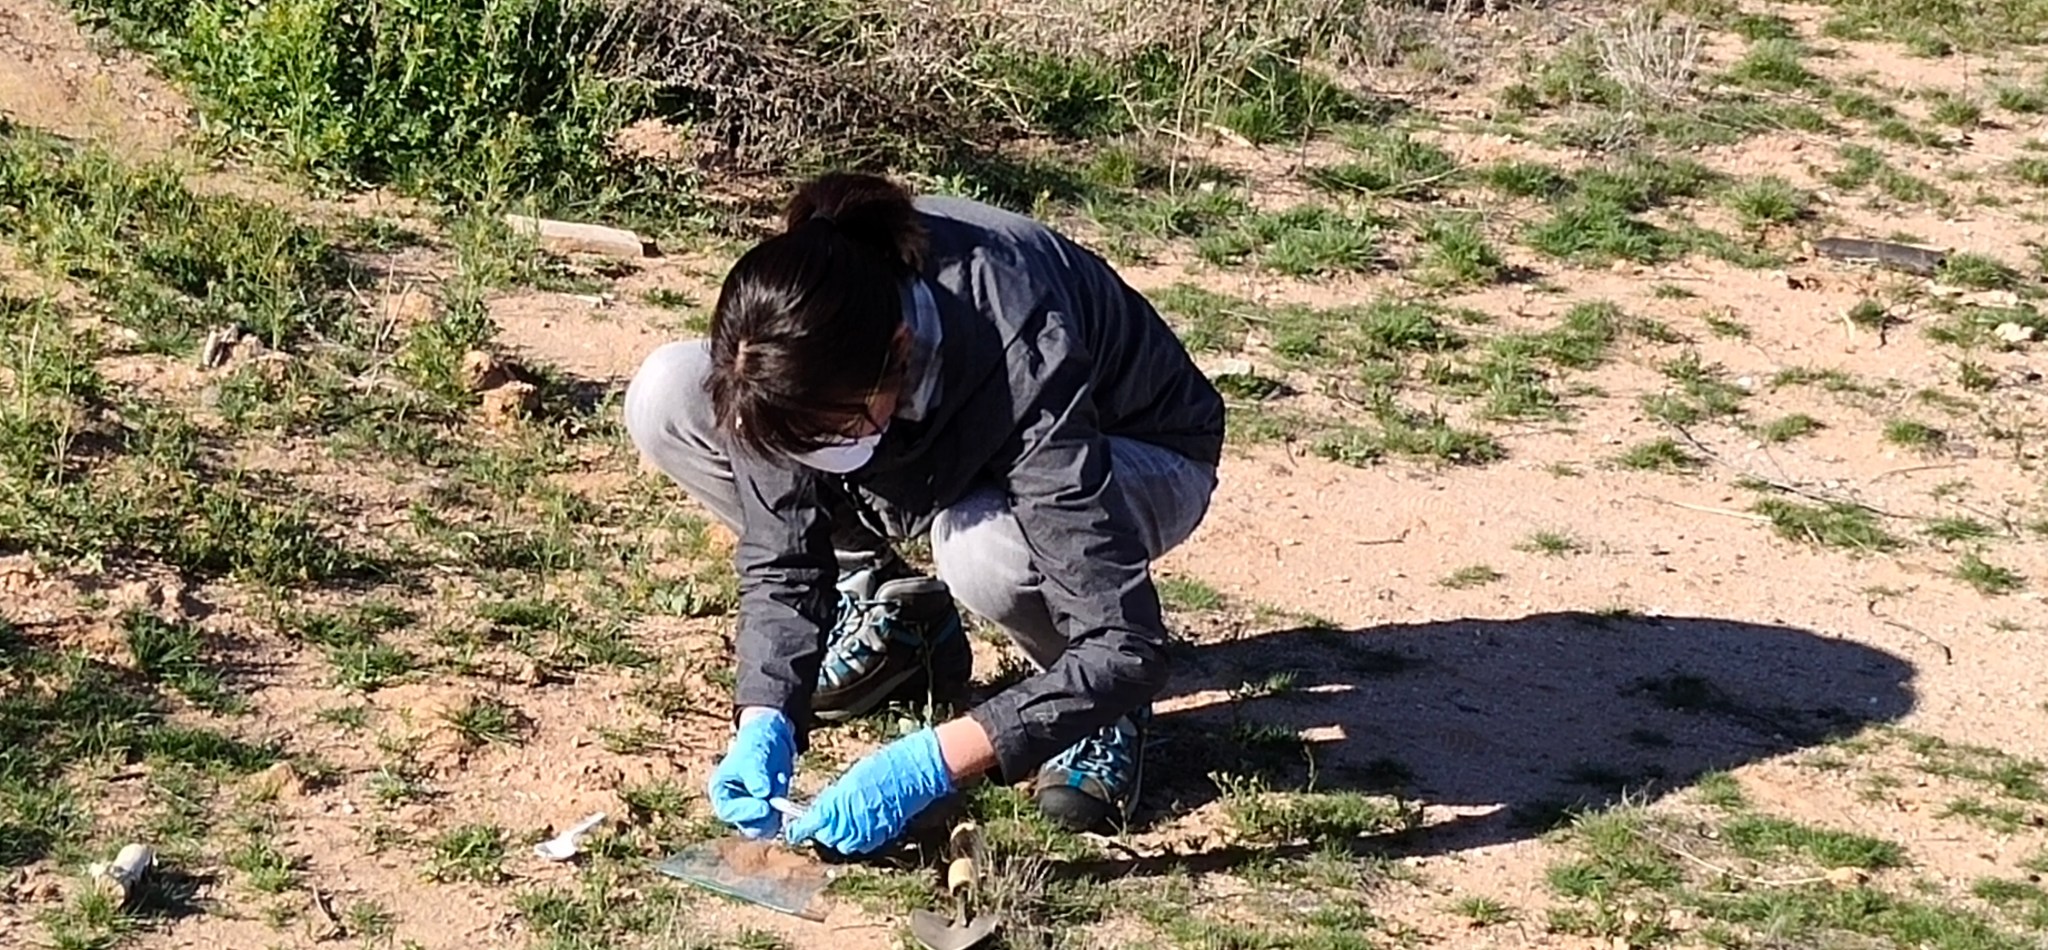 A woman crouches in a dusty field with scrubby green grass. She is wearing a mask and blue gloves and taking a sample from the ground.